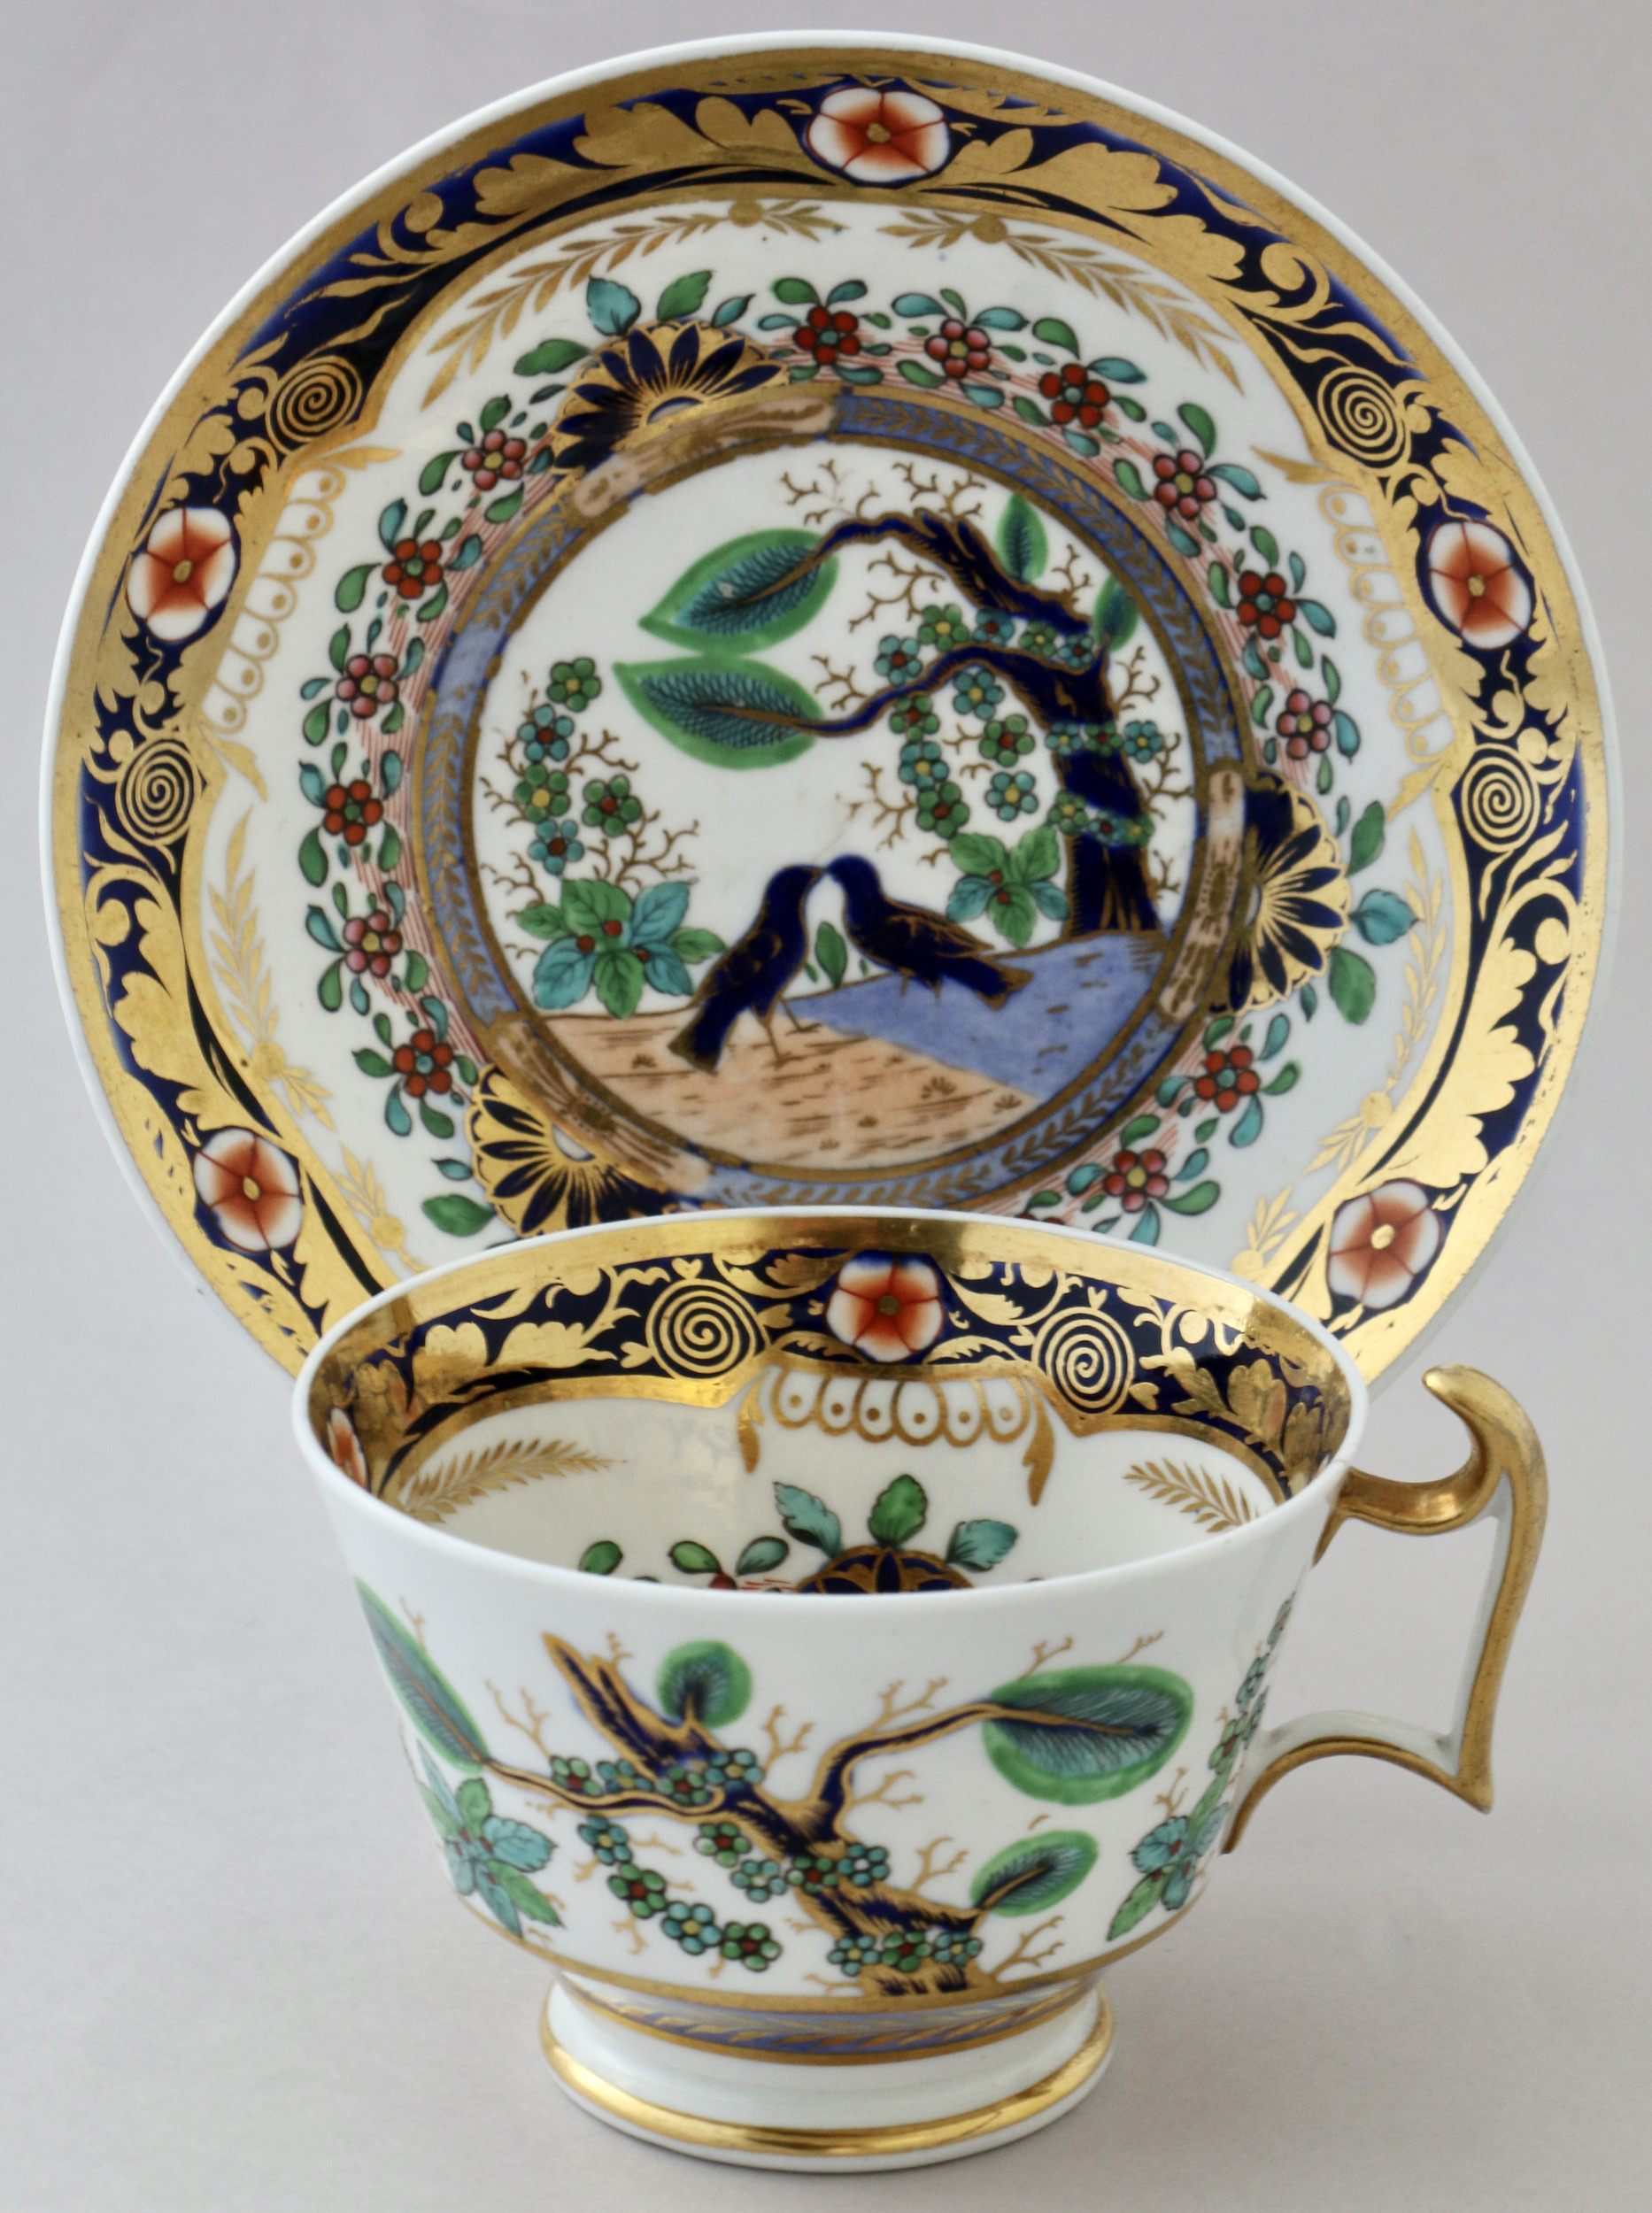 Spode richly decorated Imari-style cup & saucer, 1817 - Cotswold 